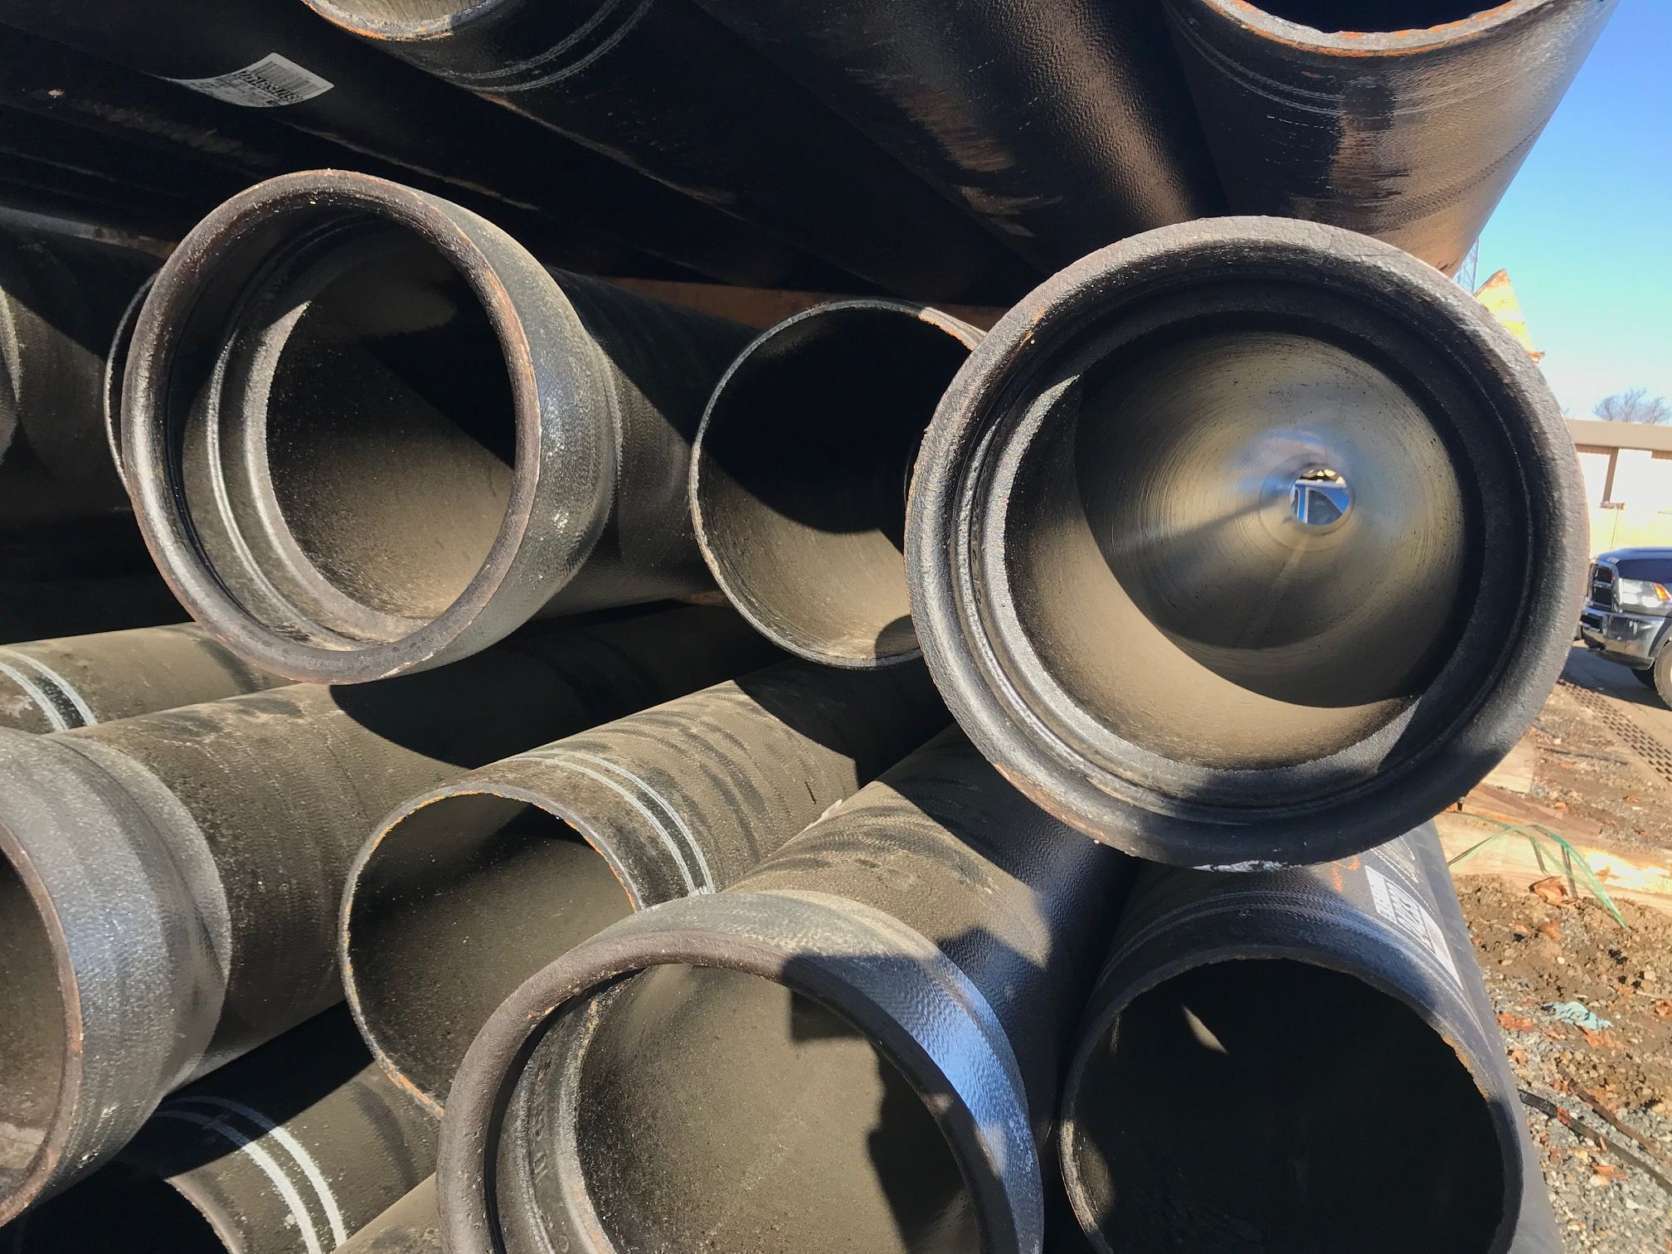 Despite costing more, WSSC general manager Carla Reid said the zinc-coated pipes will save money in road repair. (WTOP/Neal Augenstein)